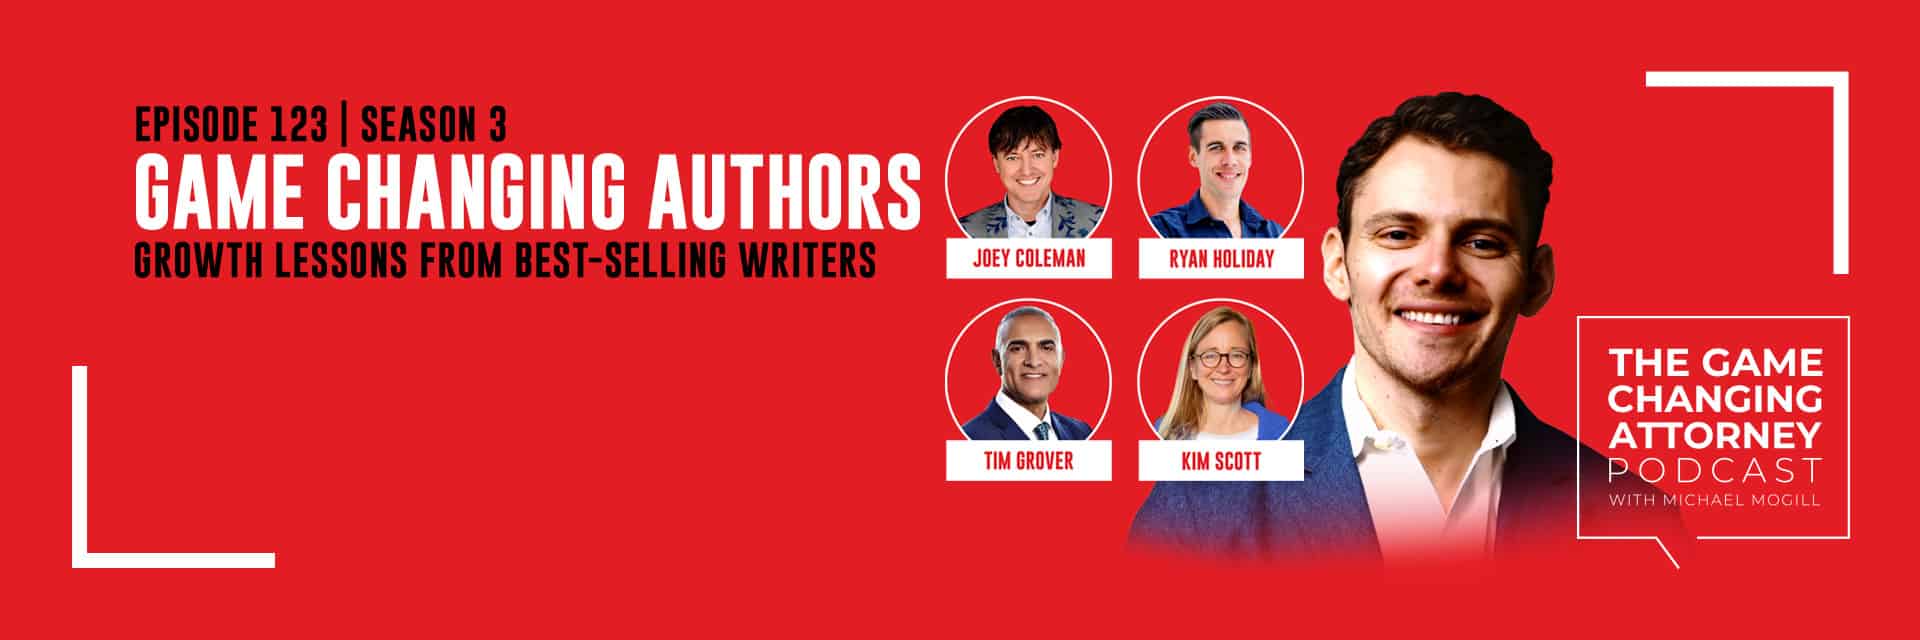 The Game Changing Attorney: Game Changing Authors